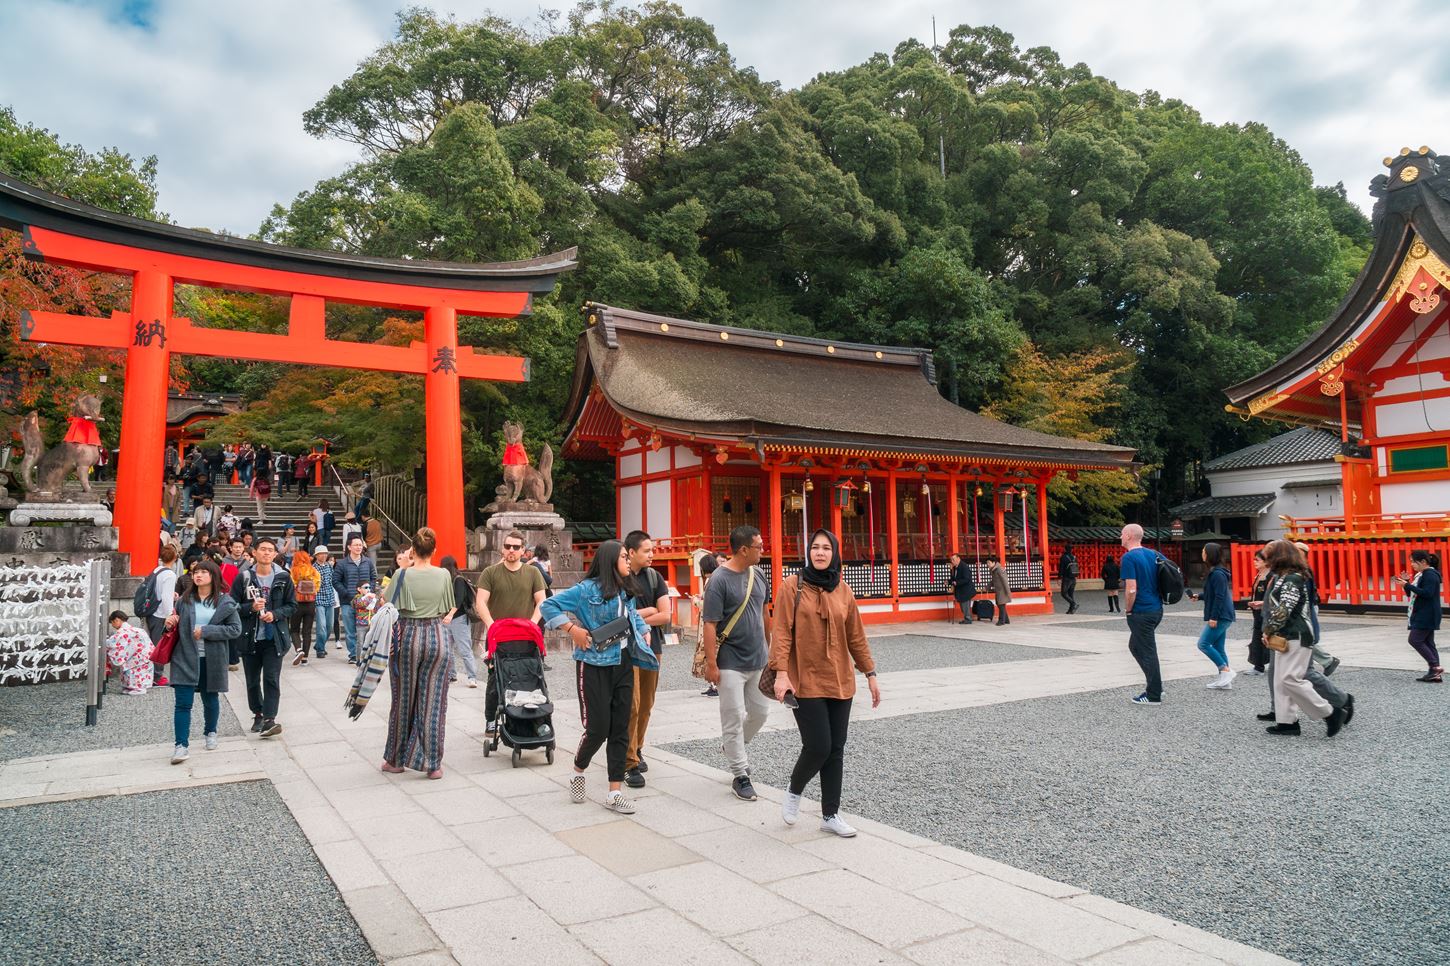 Sightseeing scenery that simply shows the weather in Kyoto in November3